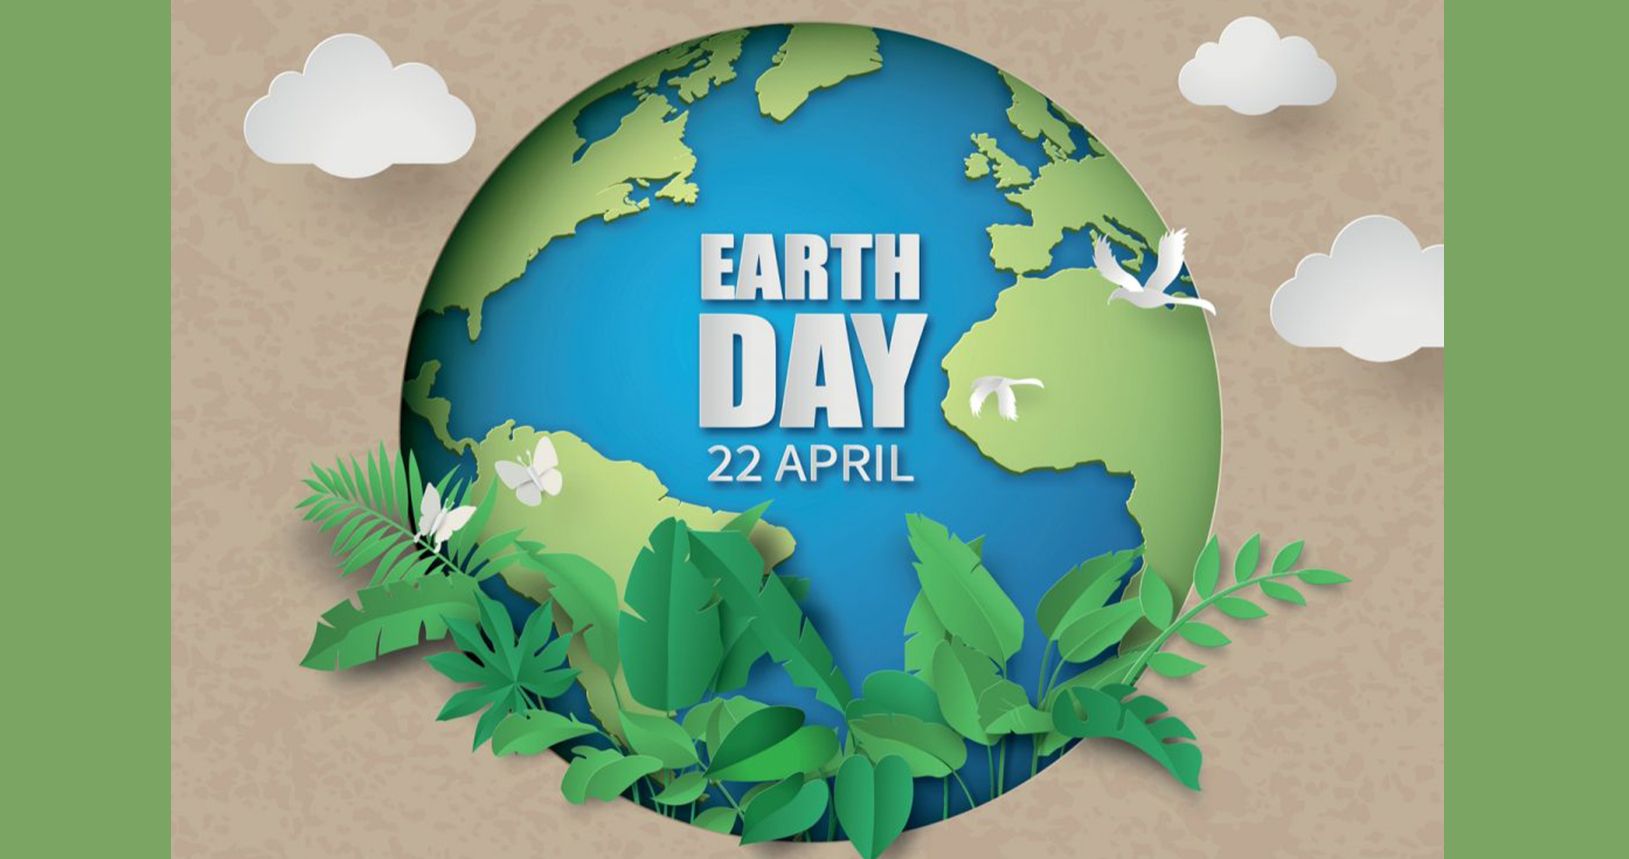 Celebrate Earth Day Right Here In Cheyenne All Week Long!